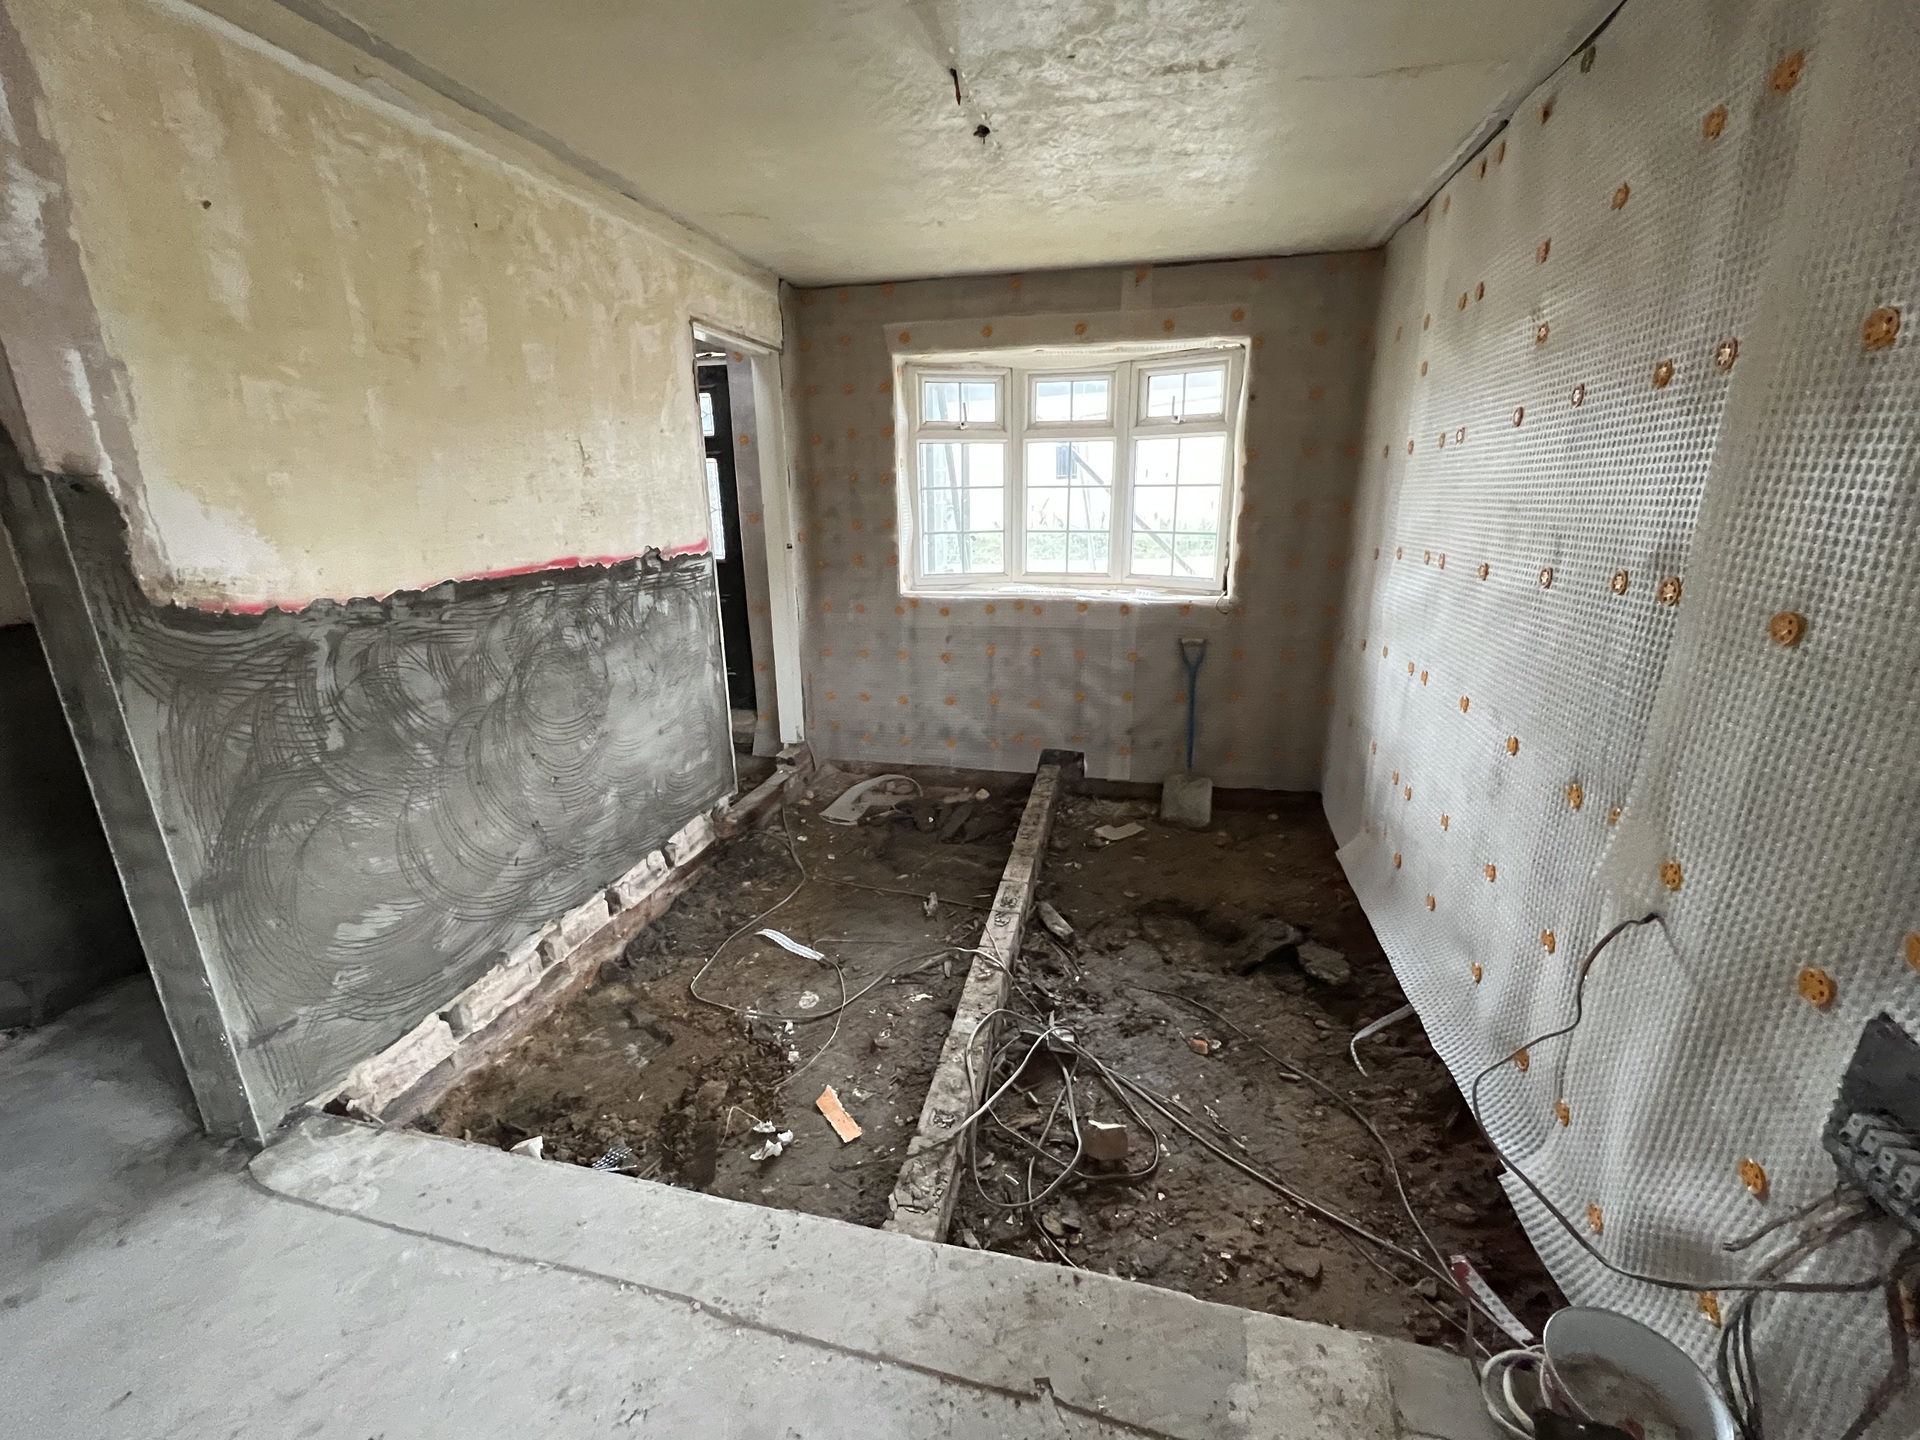 Damp Treatment & Proofing works in existing house